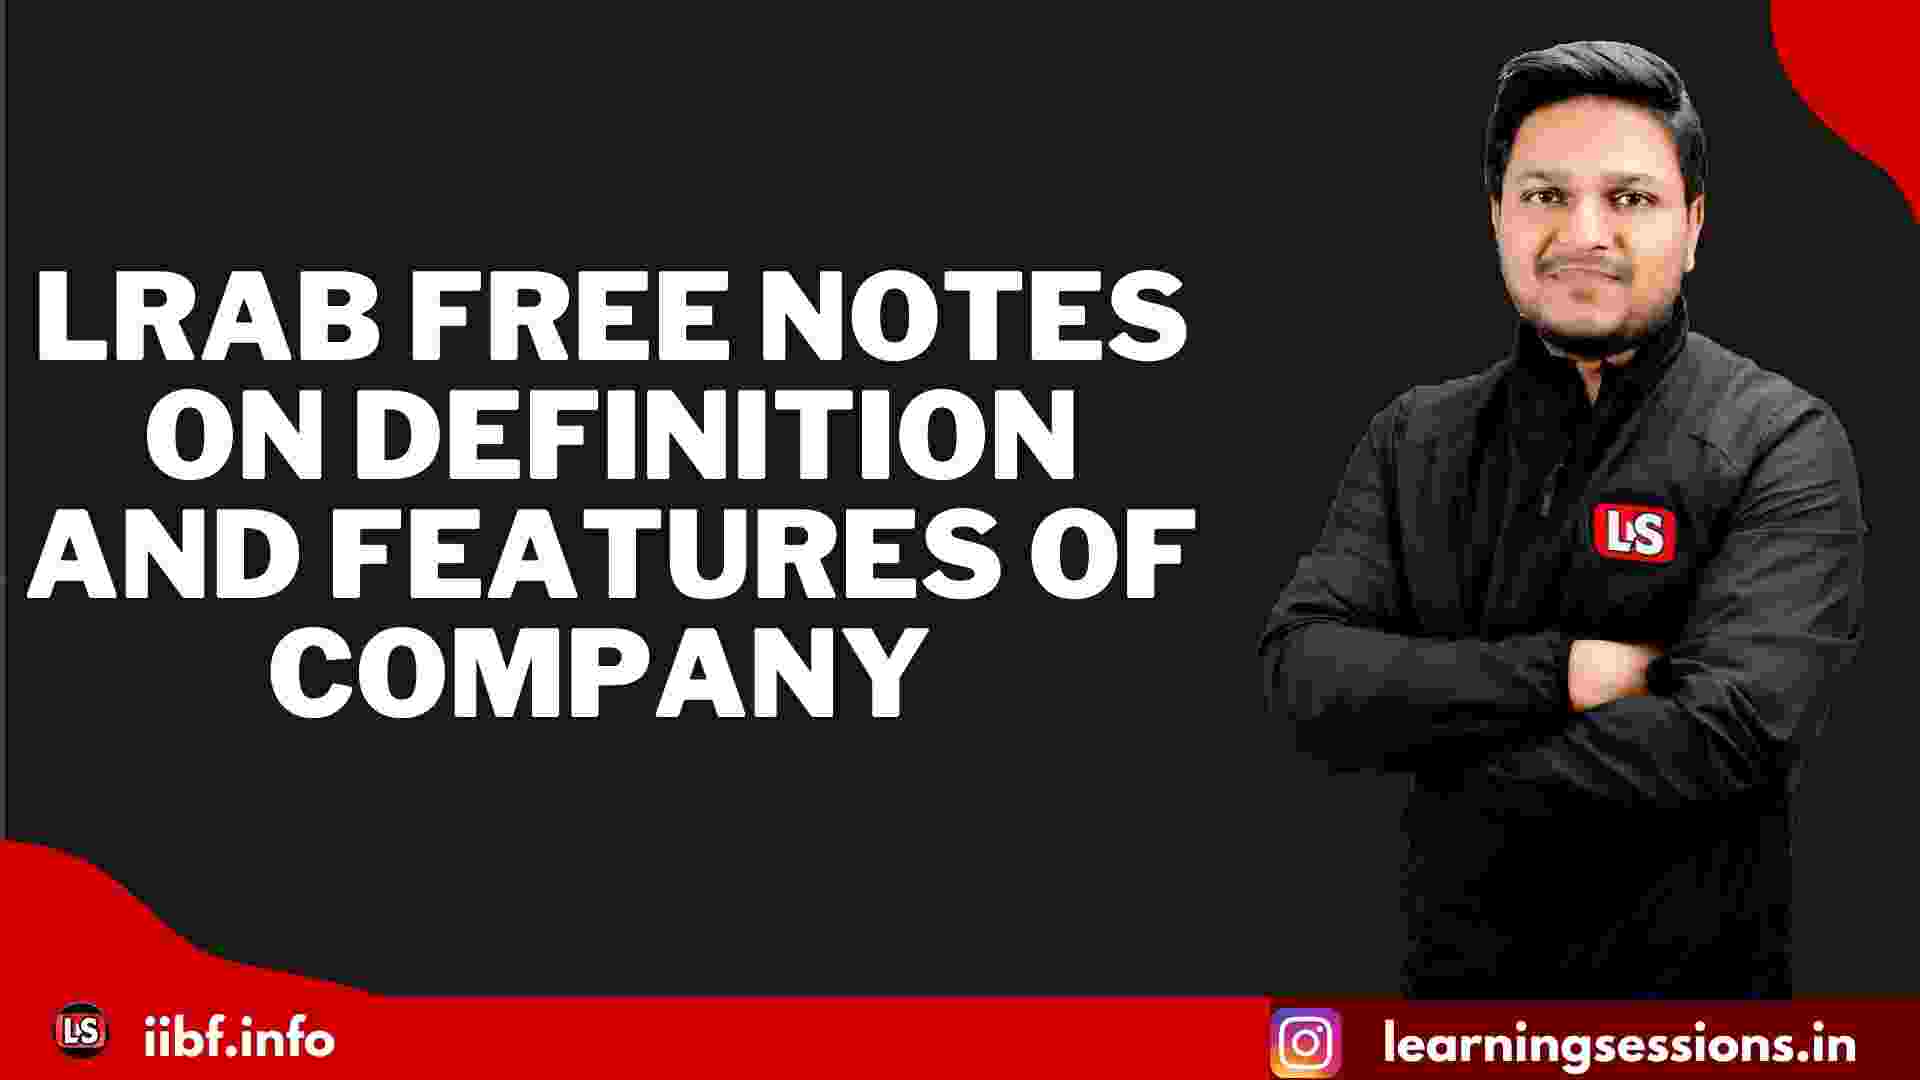 LRAB FREE NOTES ON DEFINITION AND FEATURES OF COMPANY 